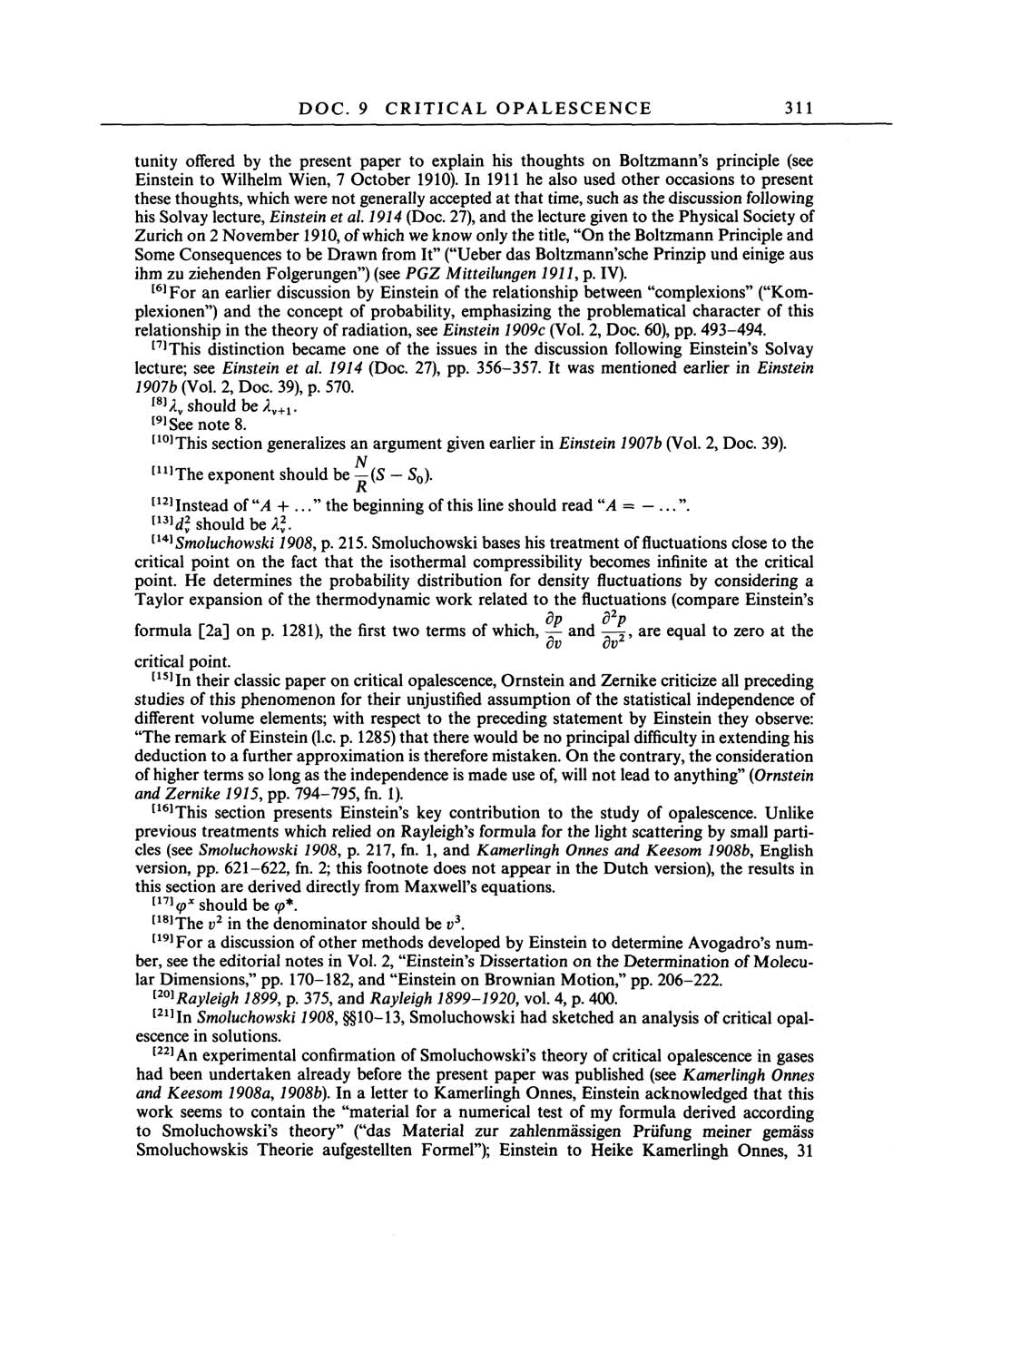 Volume 3: The Swiss Years: Writings 1909-1911 page 311